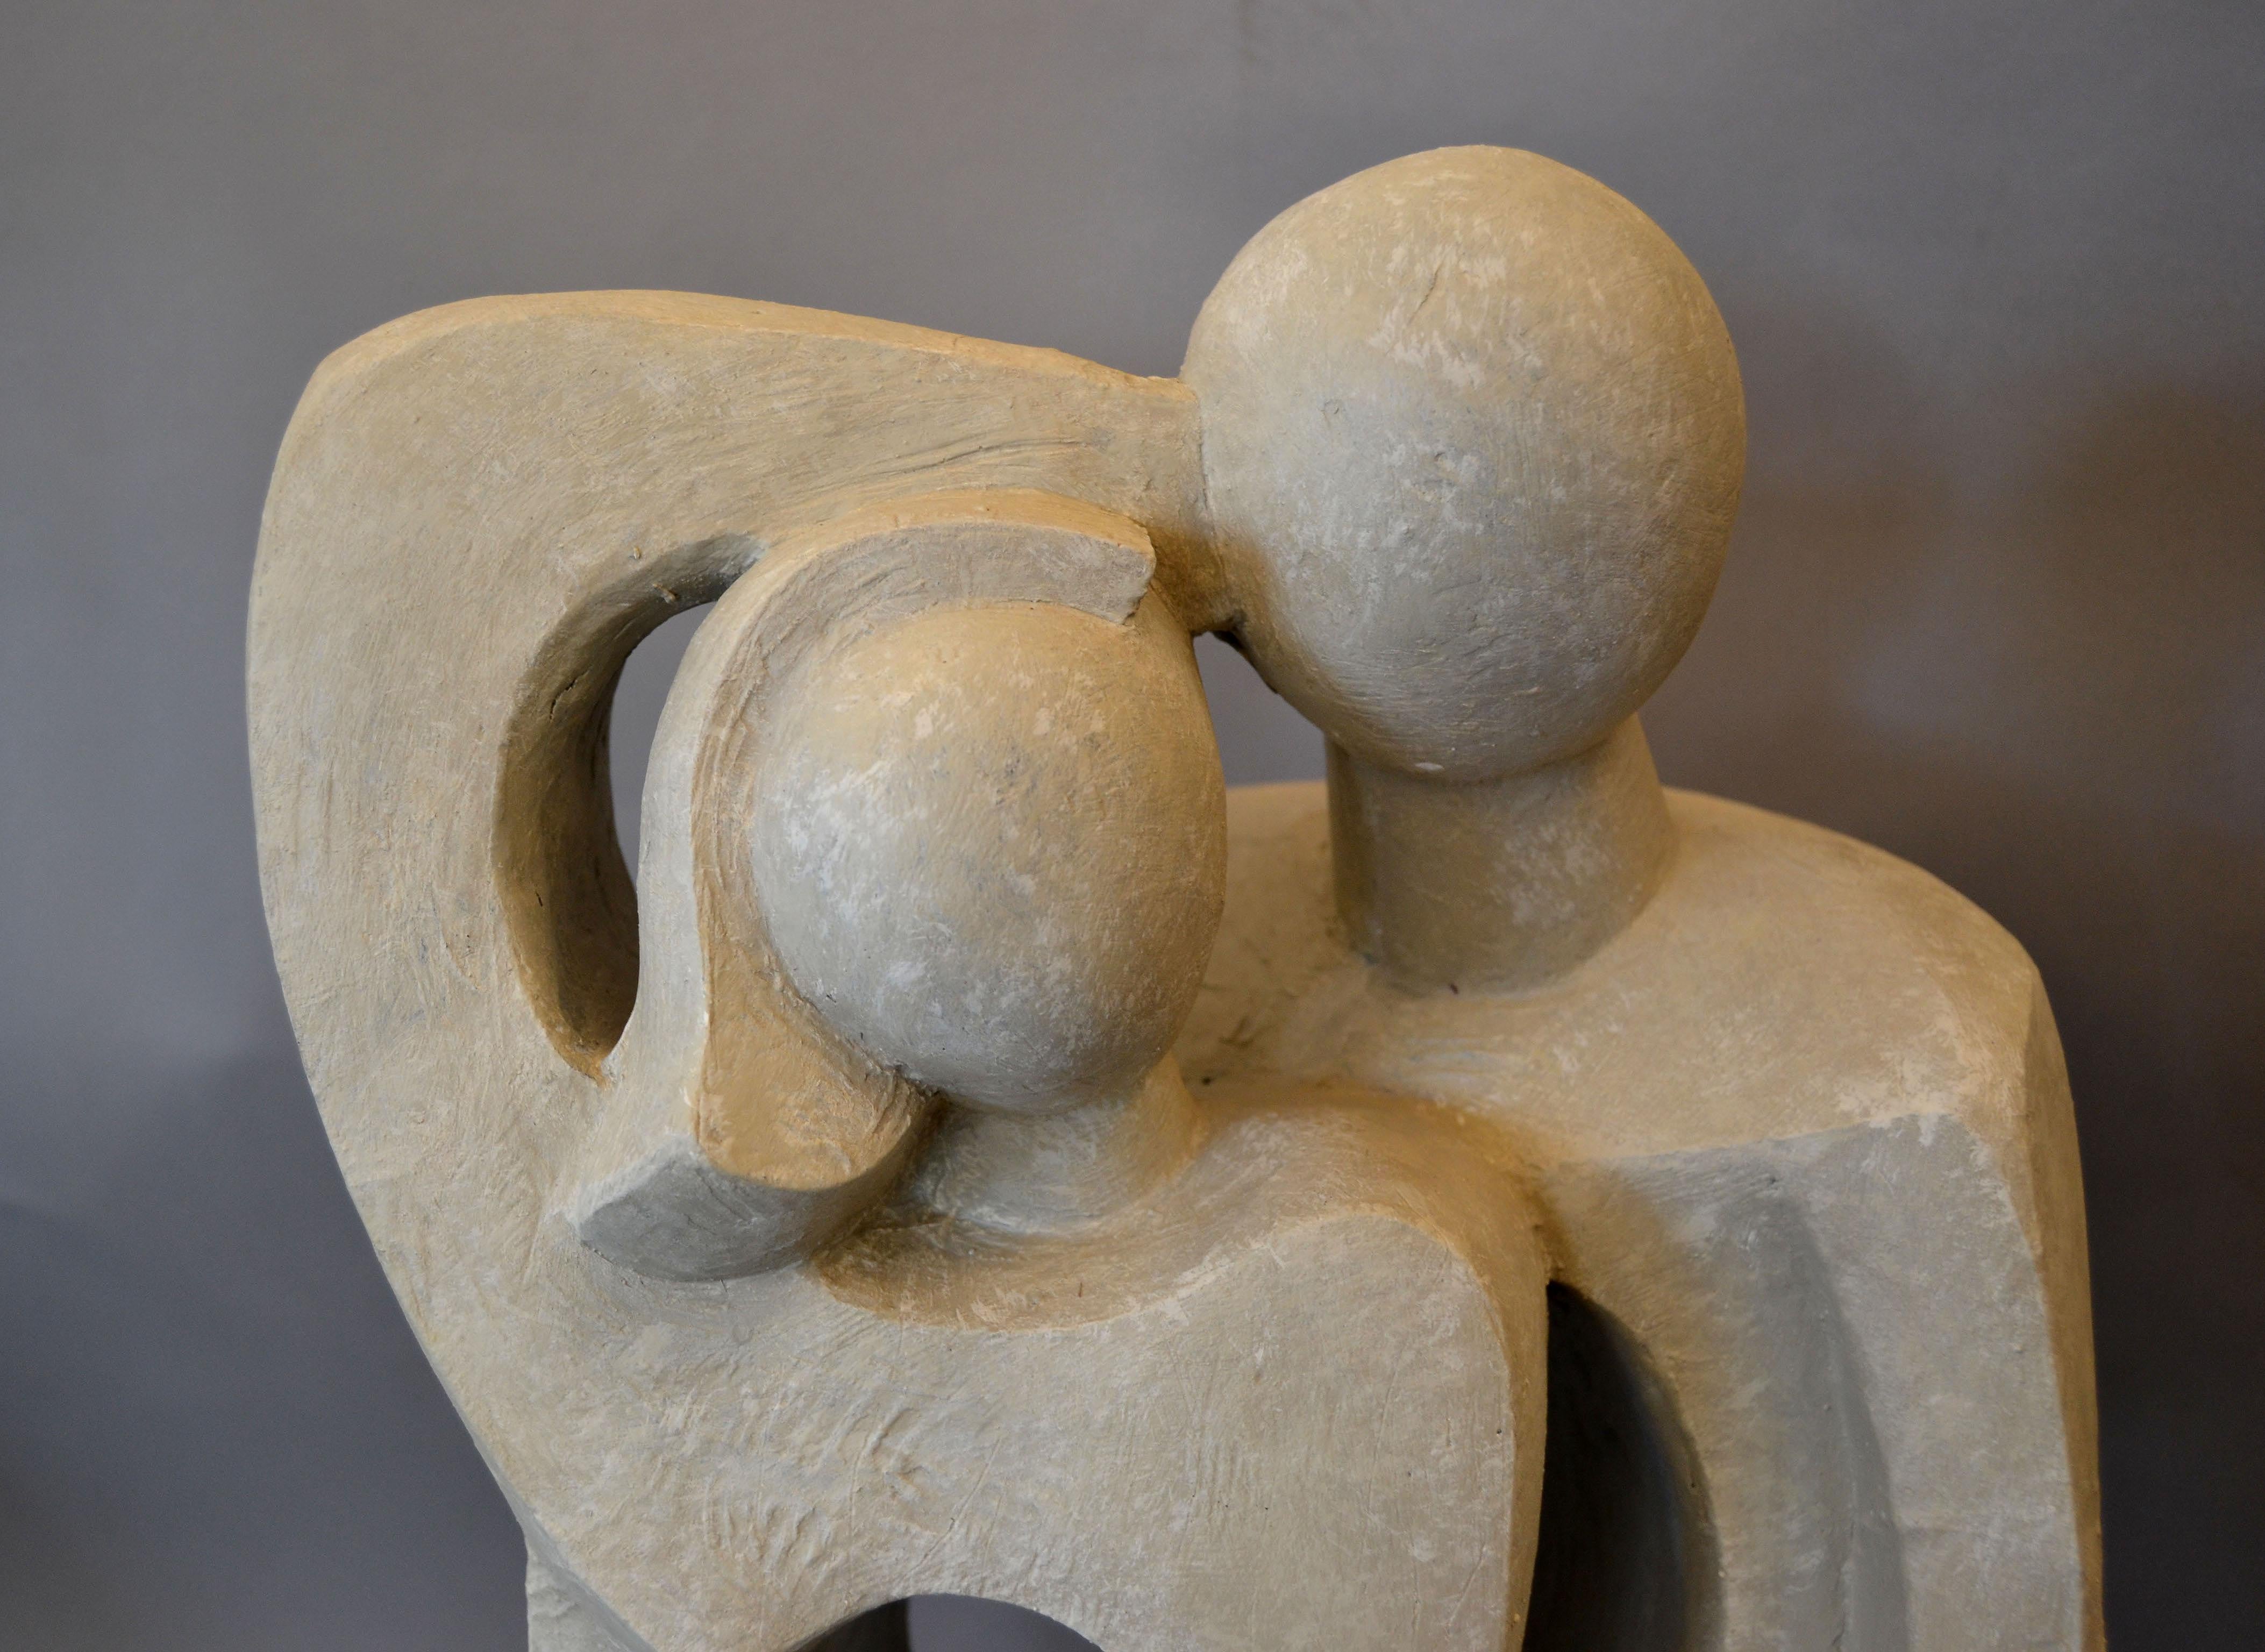 Modern abstract Geometric stylized embracing loving couple sculpture, figurine, statue in gray plaster.
Very minimalistic with clear lines and still graceful.